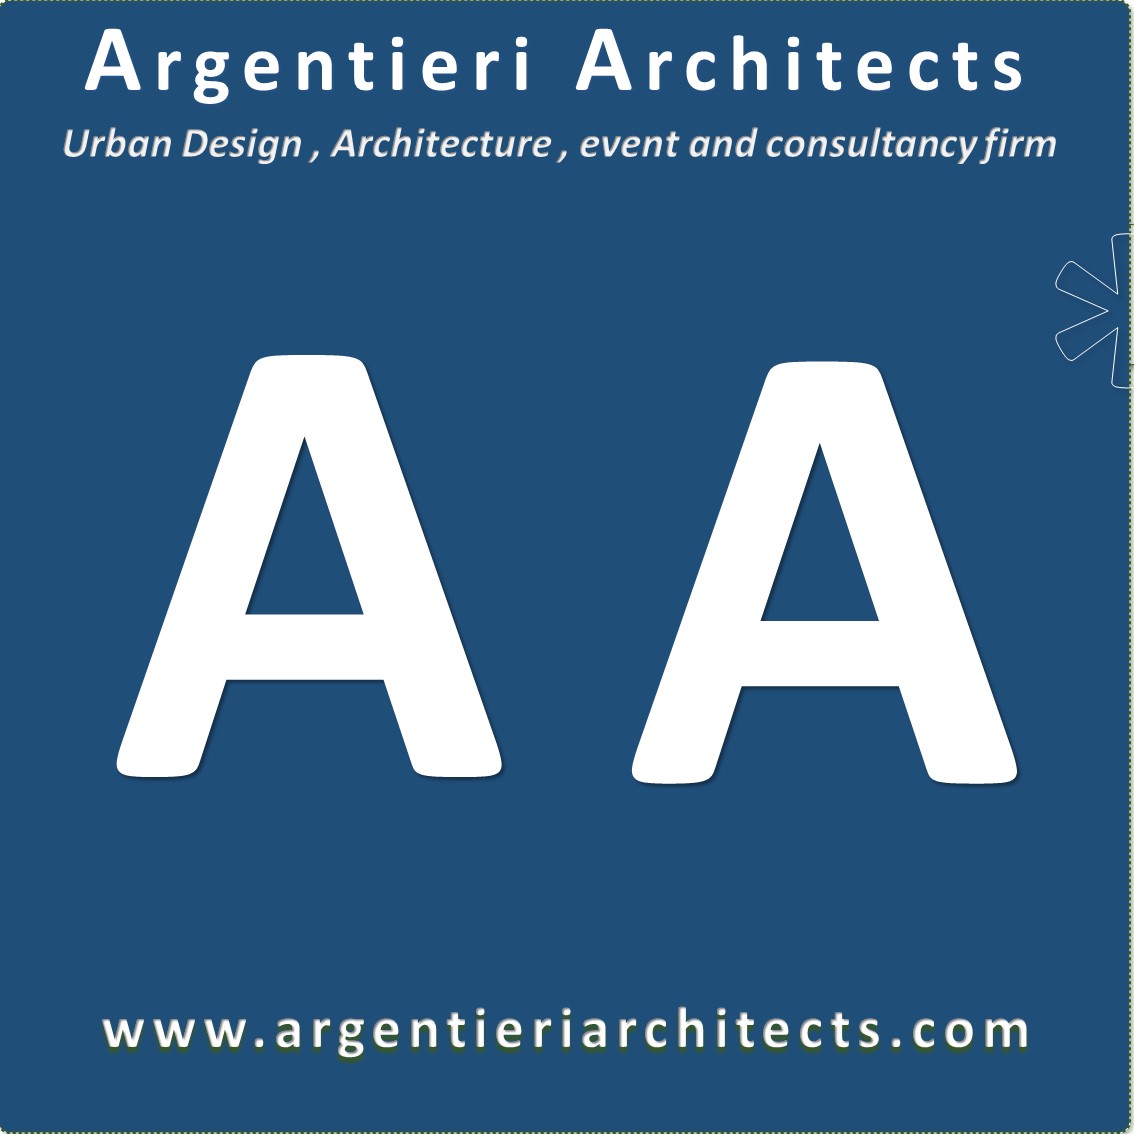 argentieri architects- Argentieri Architects is an innovation and design firm. International expert on urban strategies & development, Smart Cities, architecture , retail and hospitality  